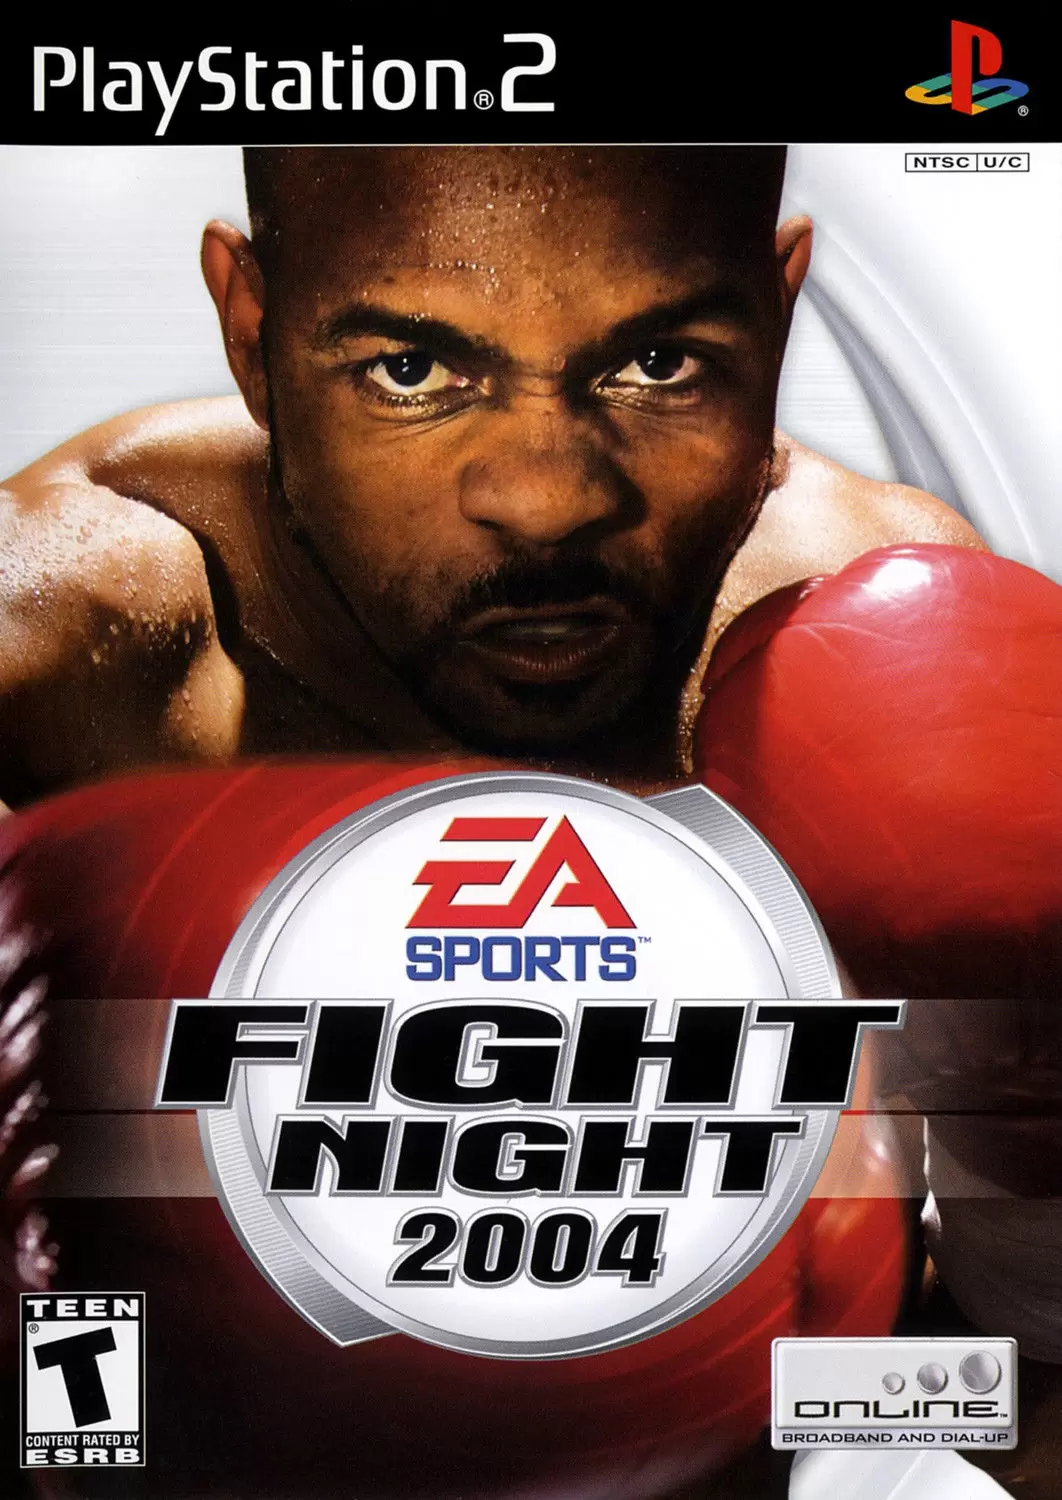 PS2 Games - Fight Night 2004